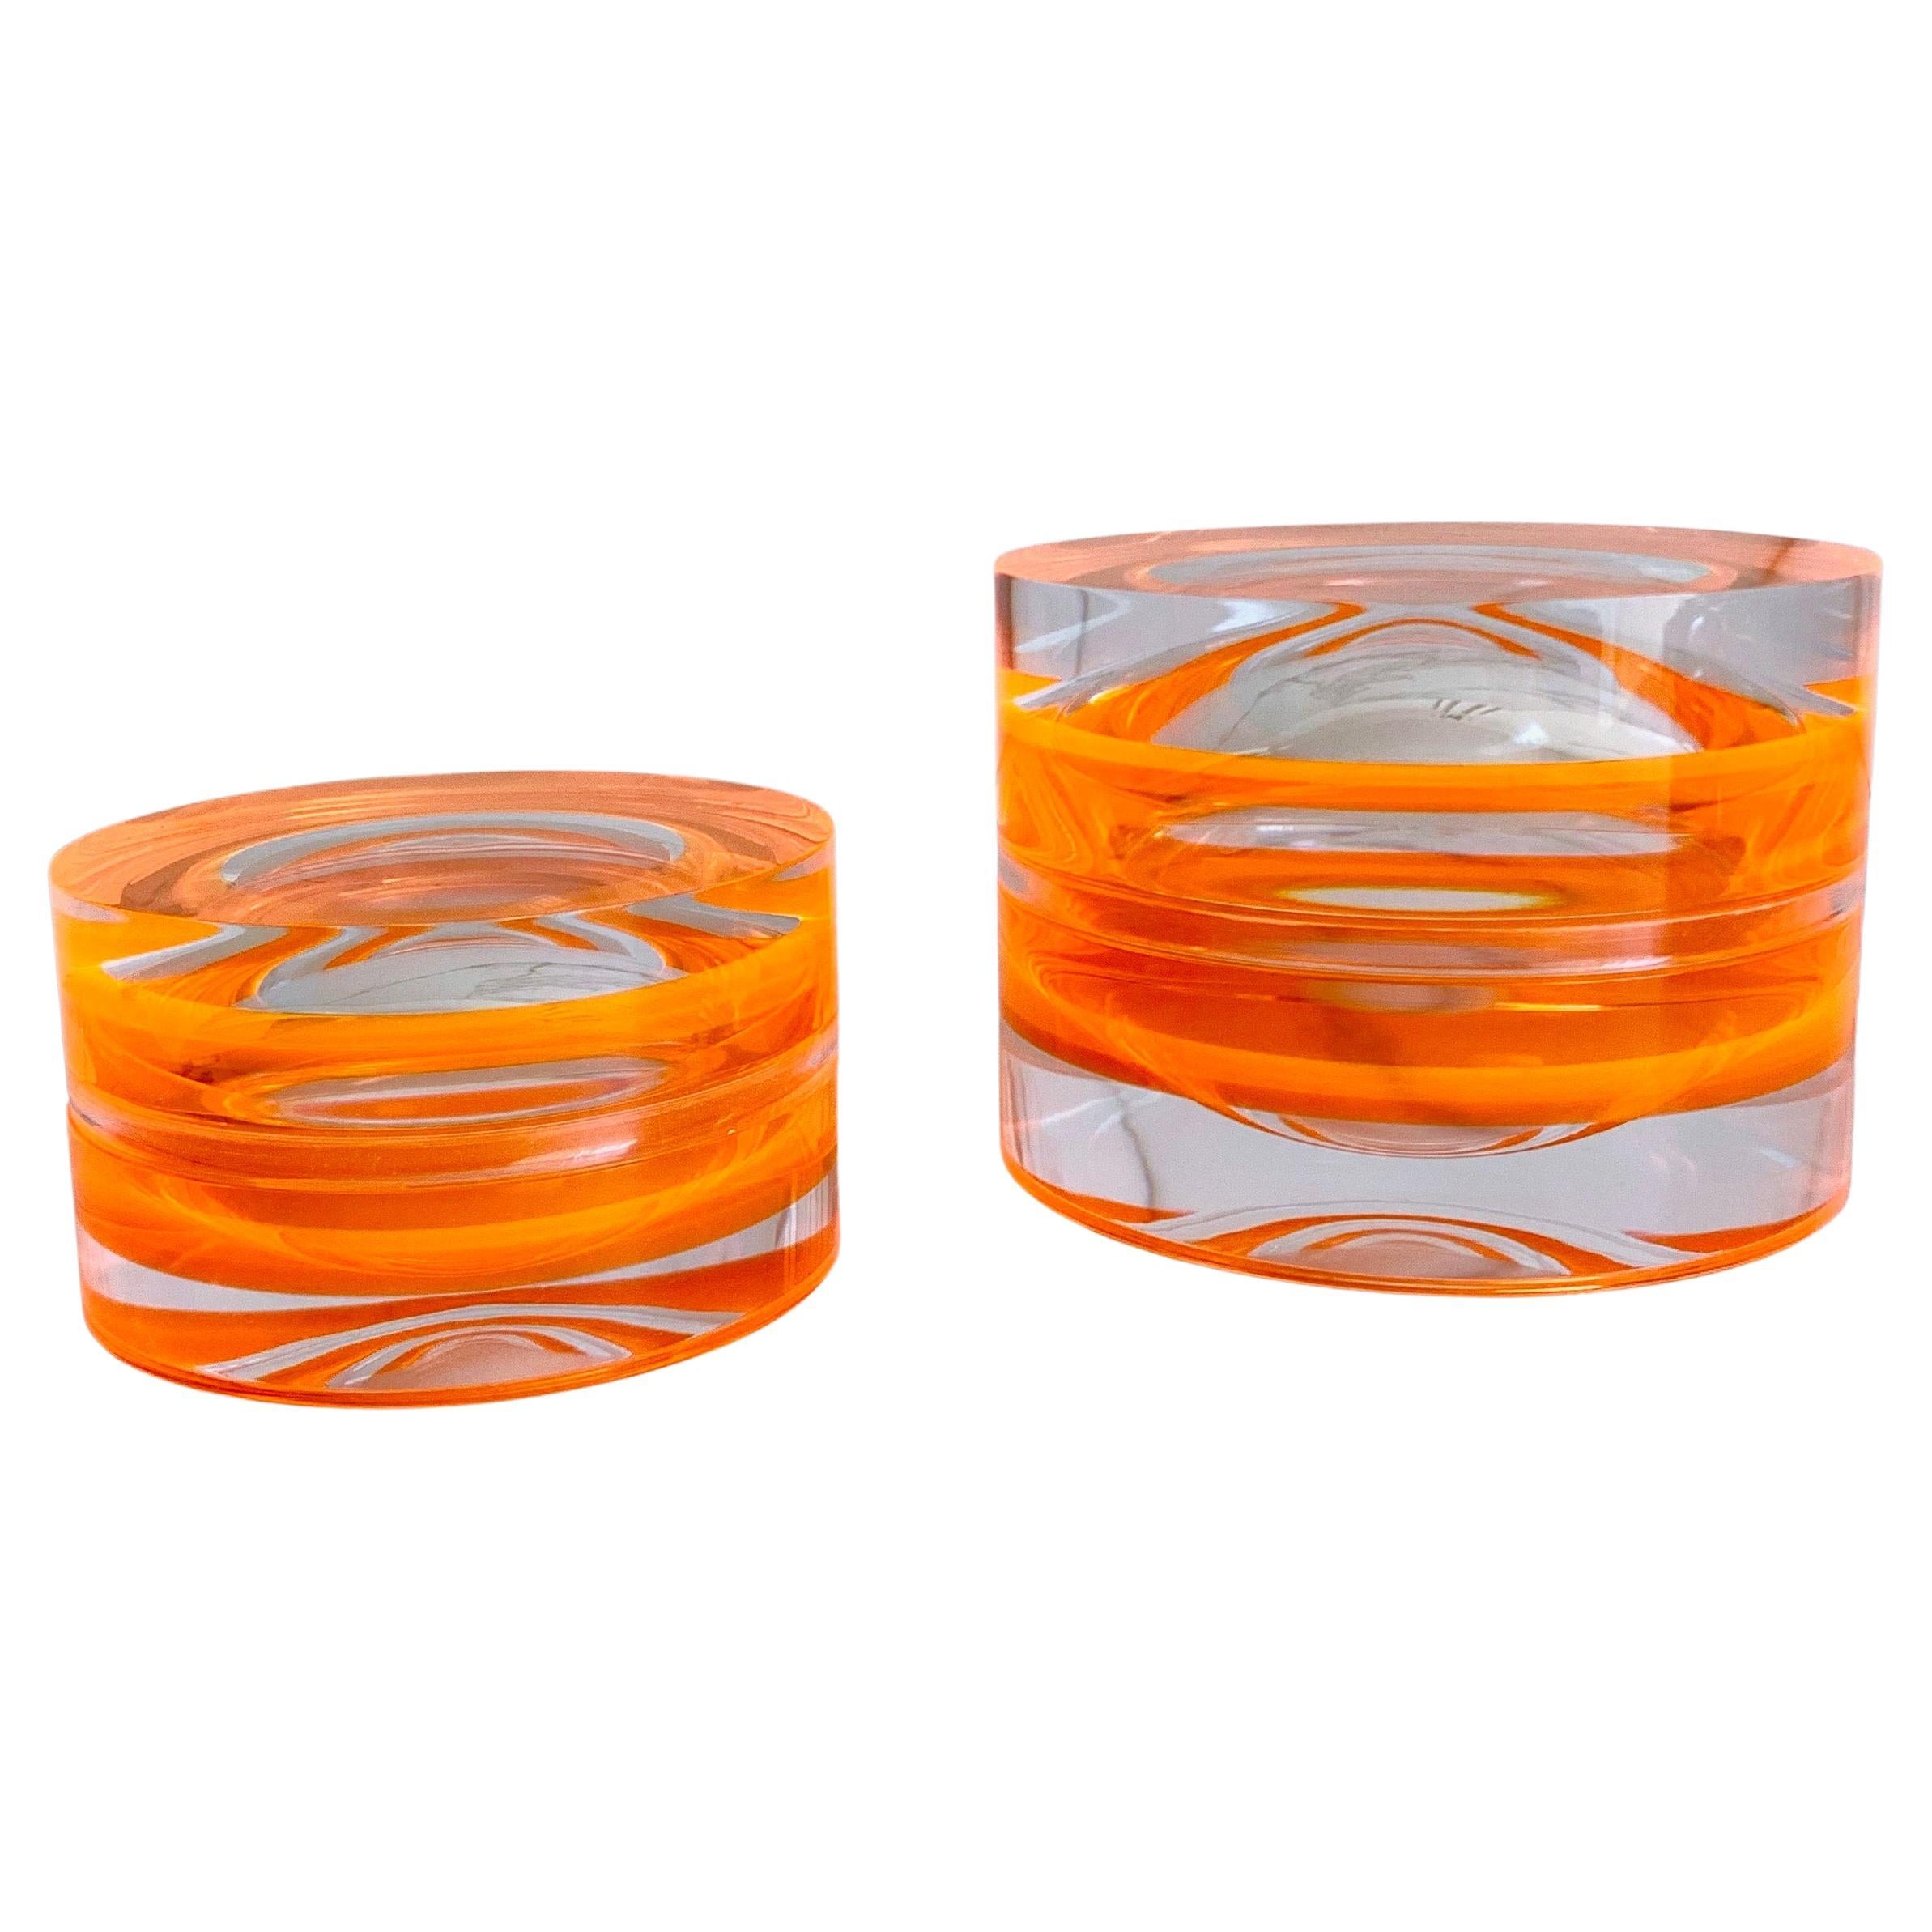 Neon Orange Acrylic Small Round Box by Paola Valle For Sale